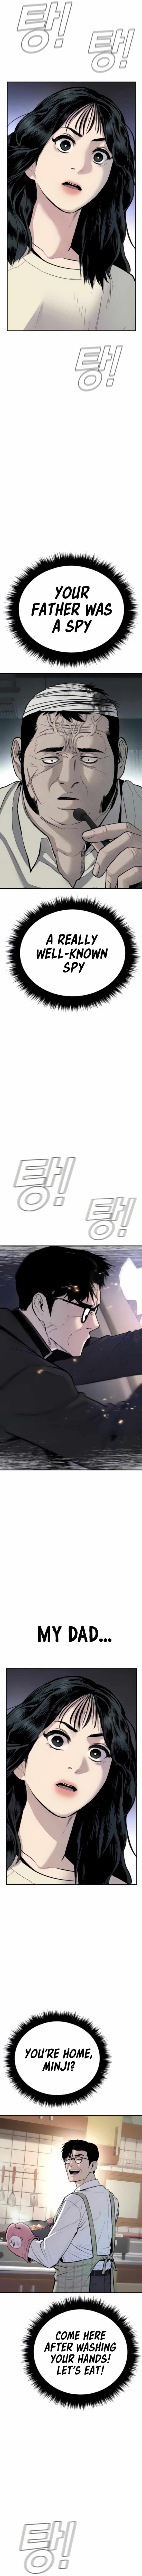 Manager Kim chapter 25 page 11